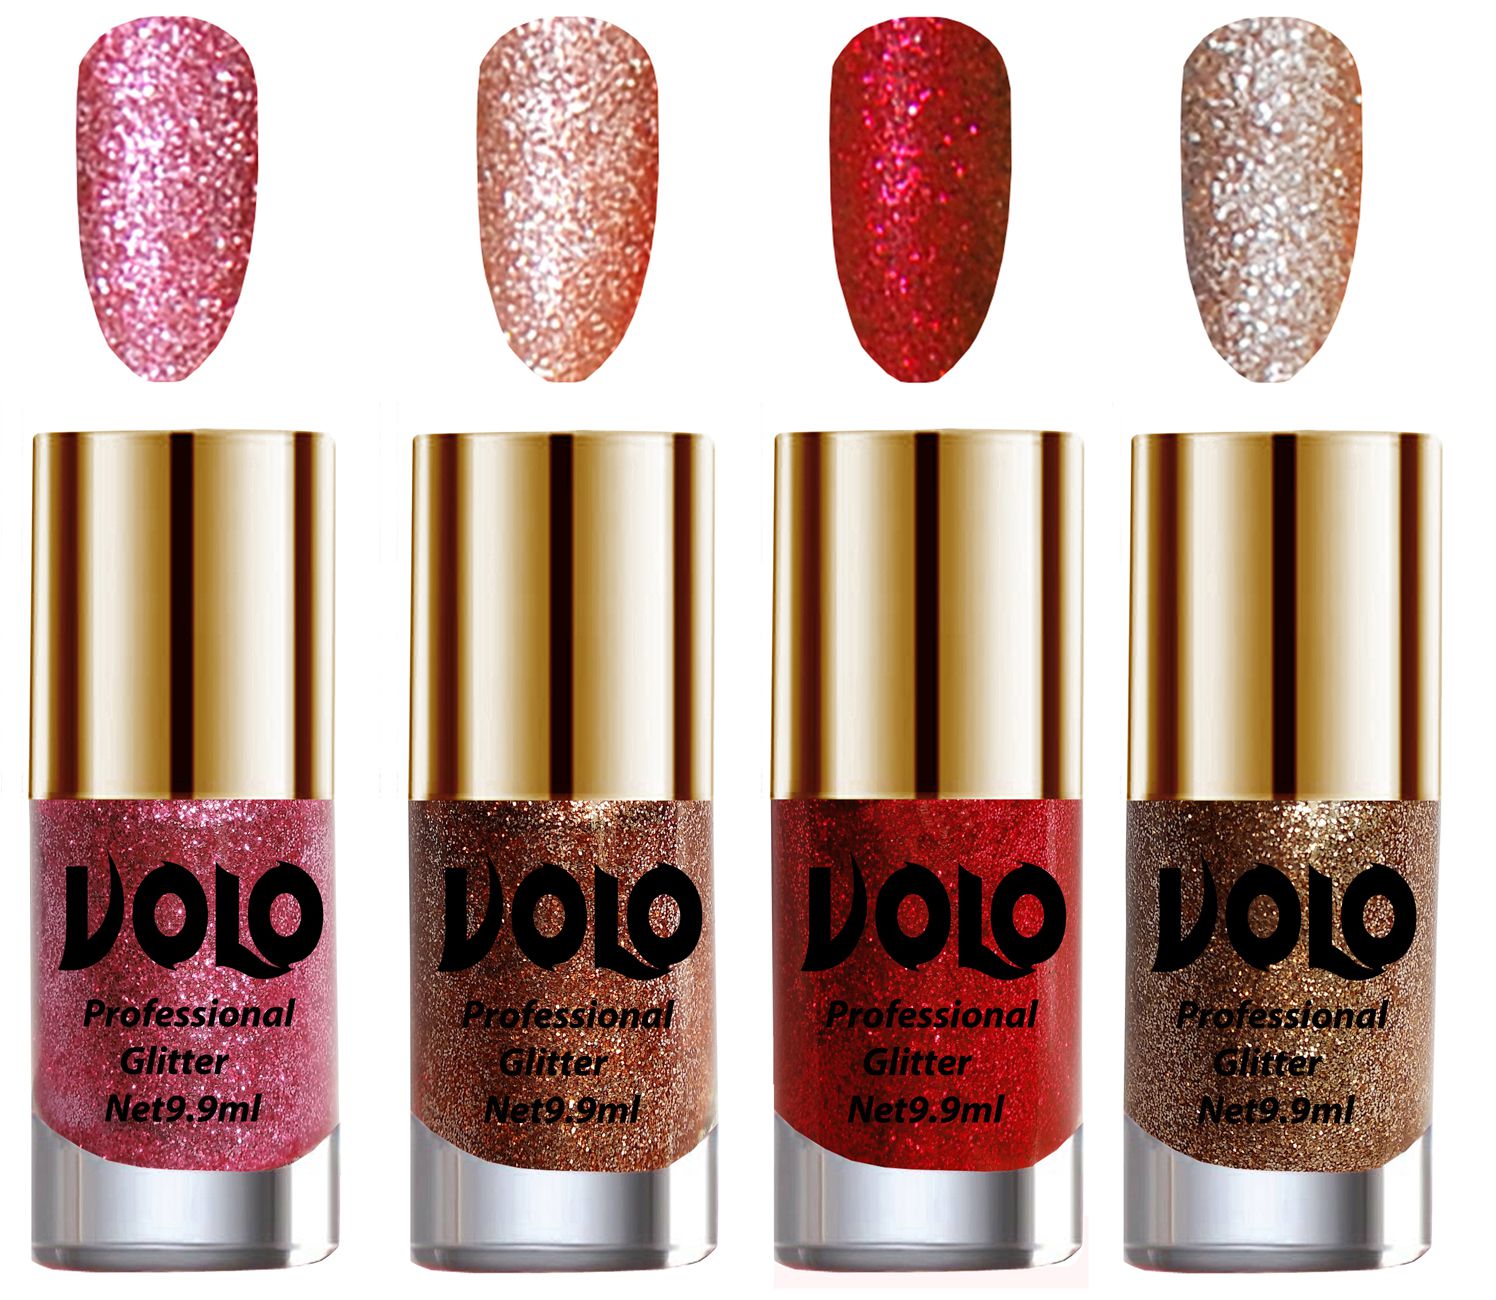     			VOLO Professionally Used Glitter Shine Nail Polish Pink,Peach,Red Gold Pack of 4 39 mL